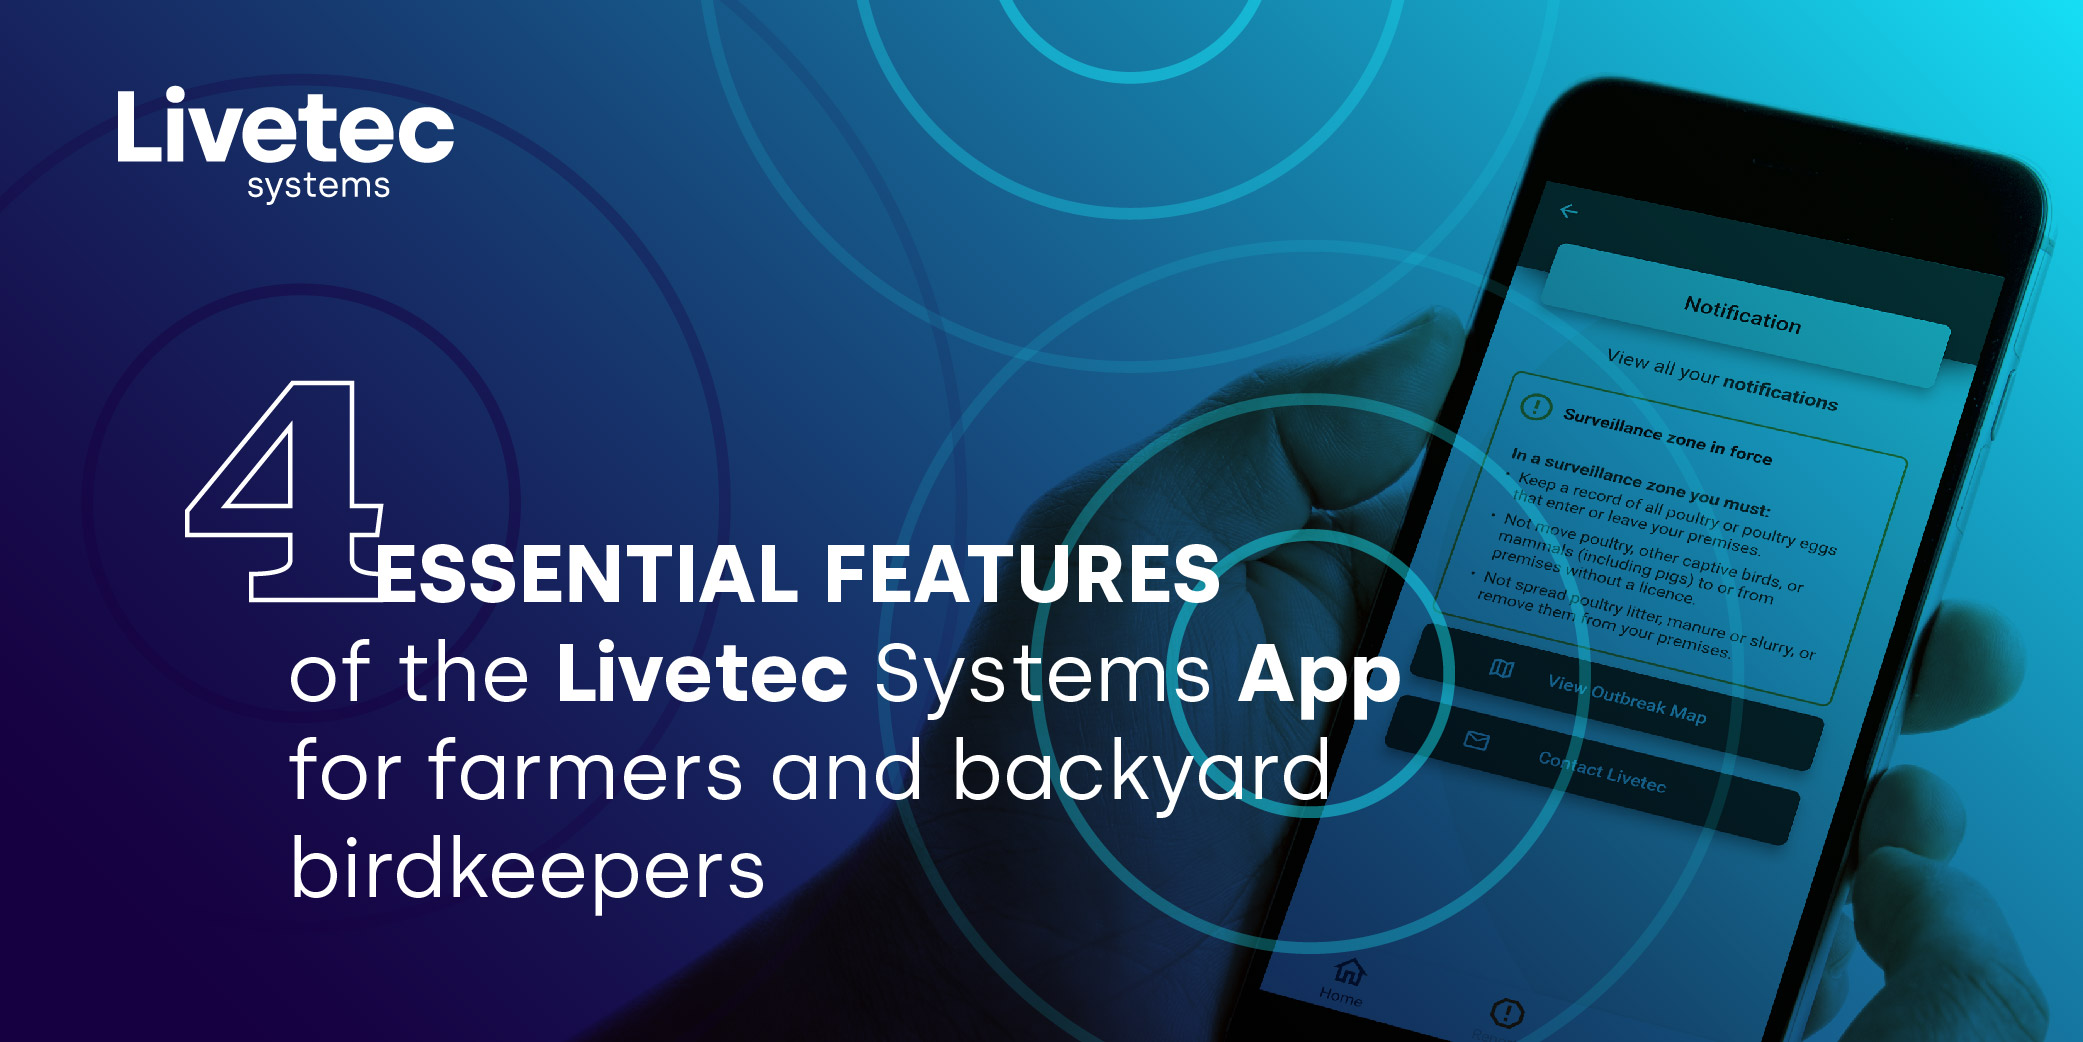 4 Essential features on the Livetec Systems app